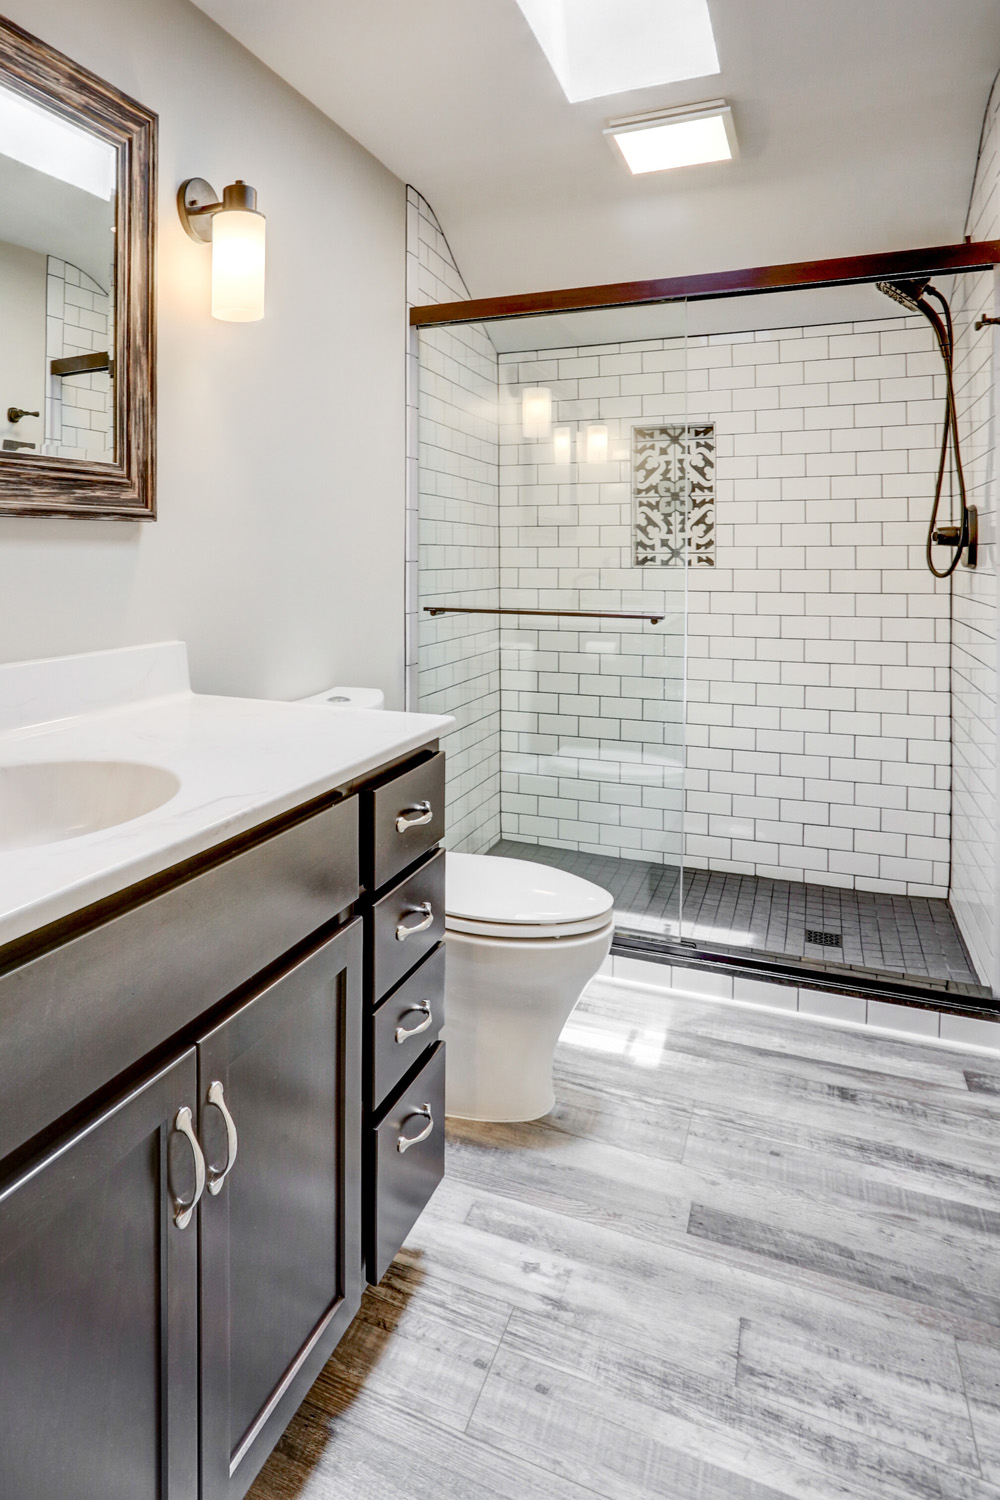 Lancaster Bathroom Remodel with gray floors and dark accents